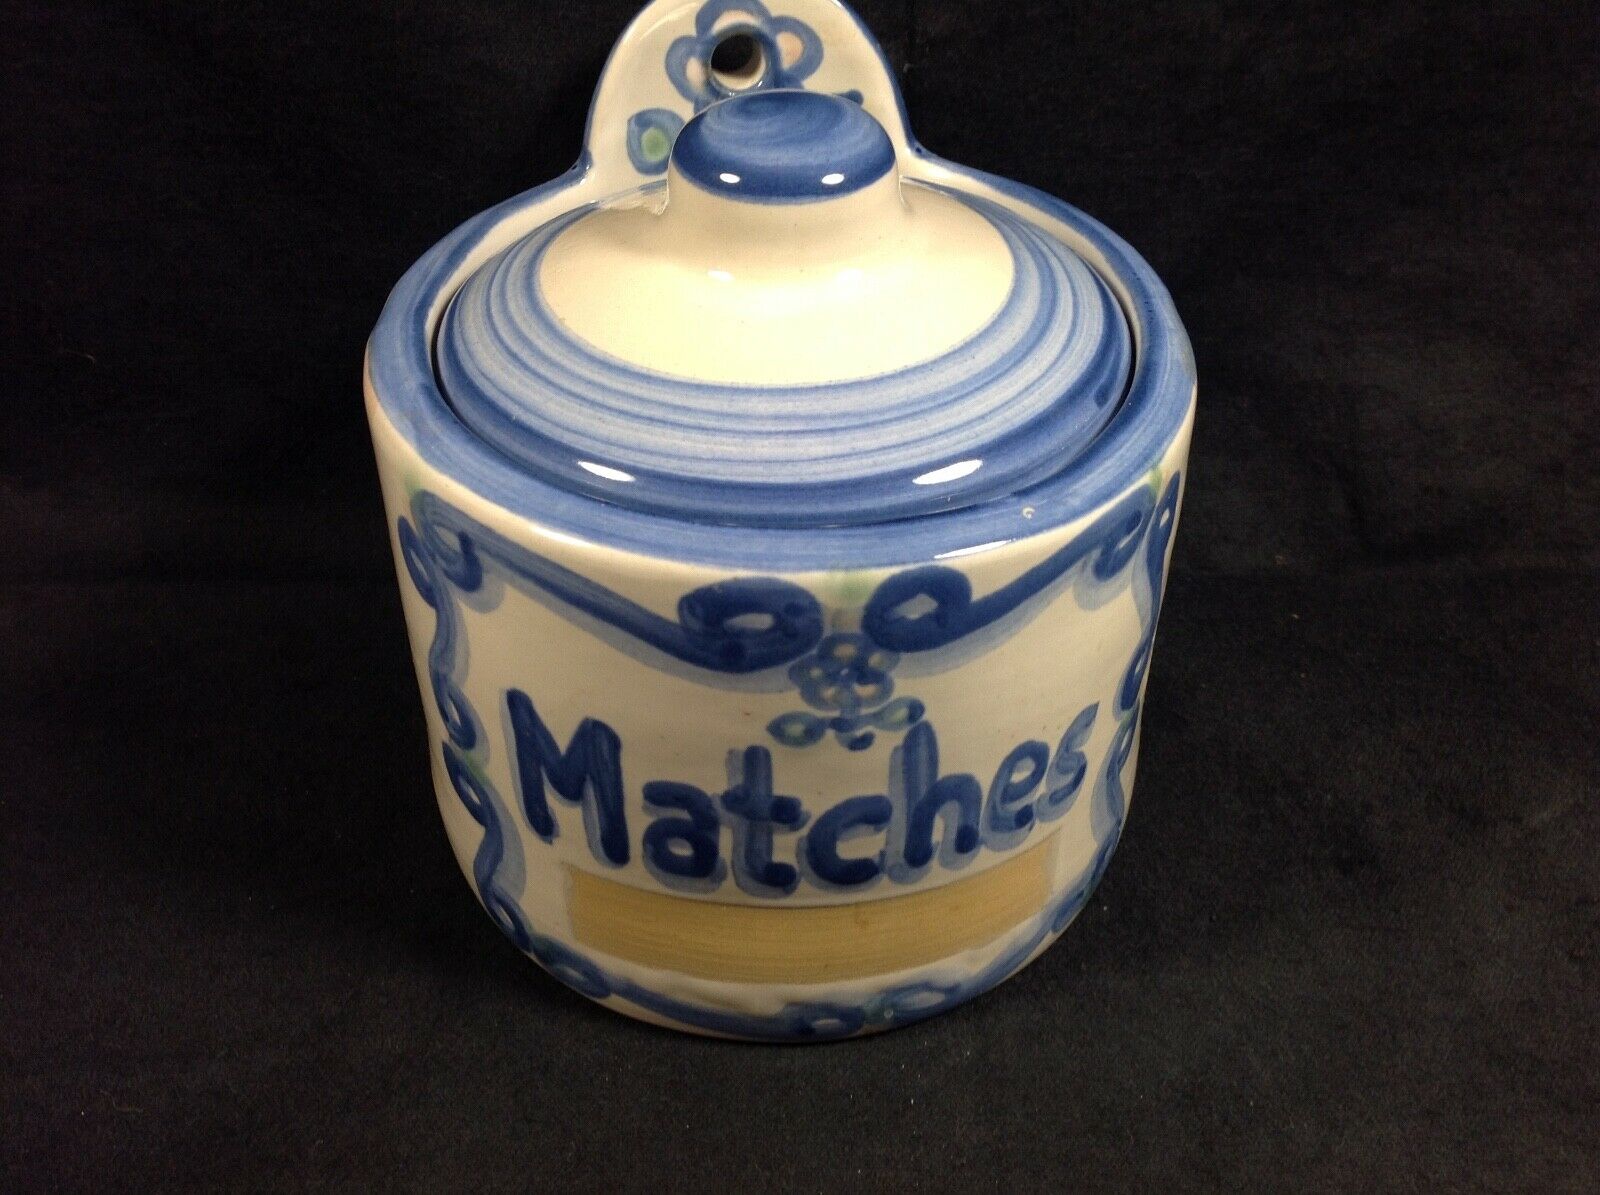 M.a. Hadley Matches Canister Rare Pottery Very Heavy